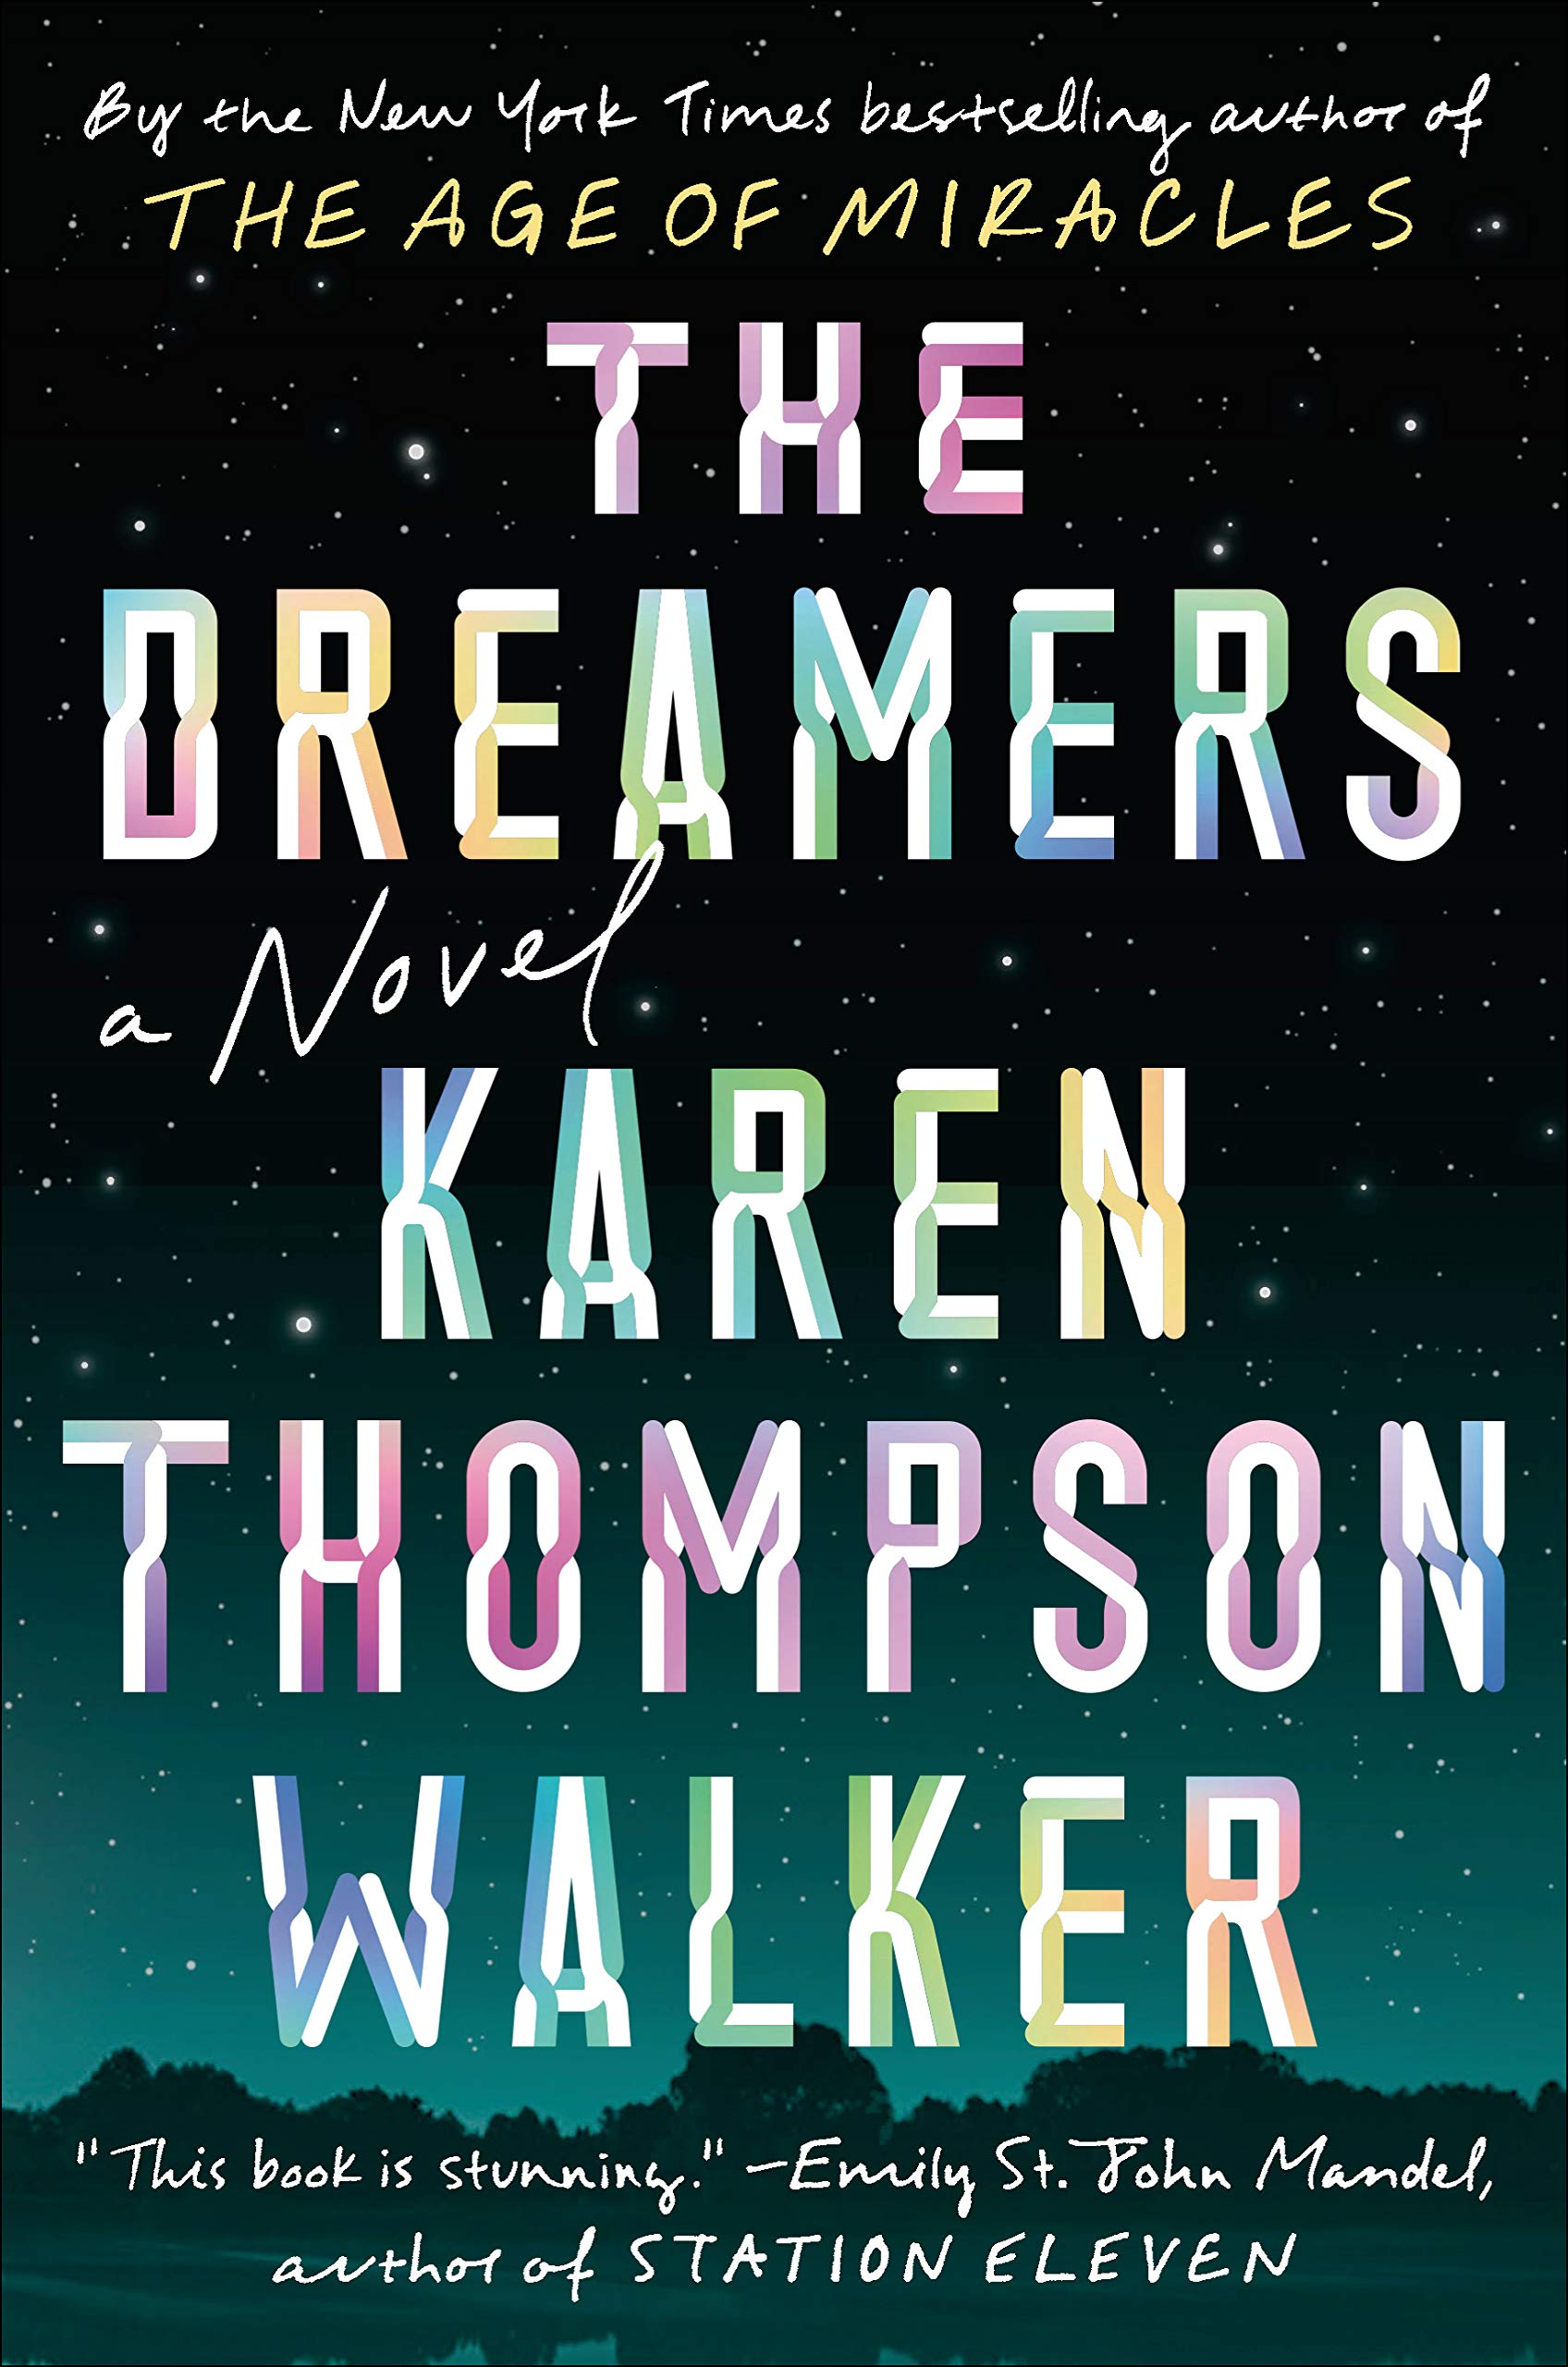 The Dreamers 2019 book releases